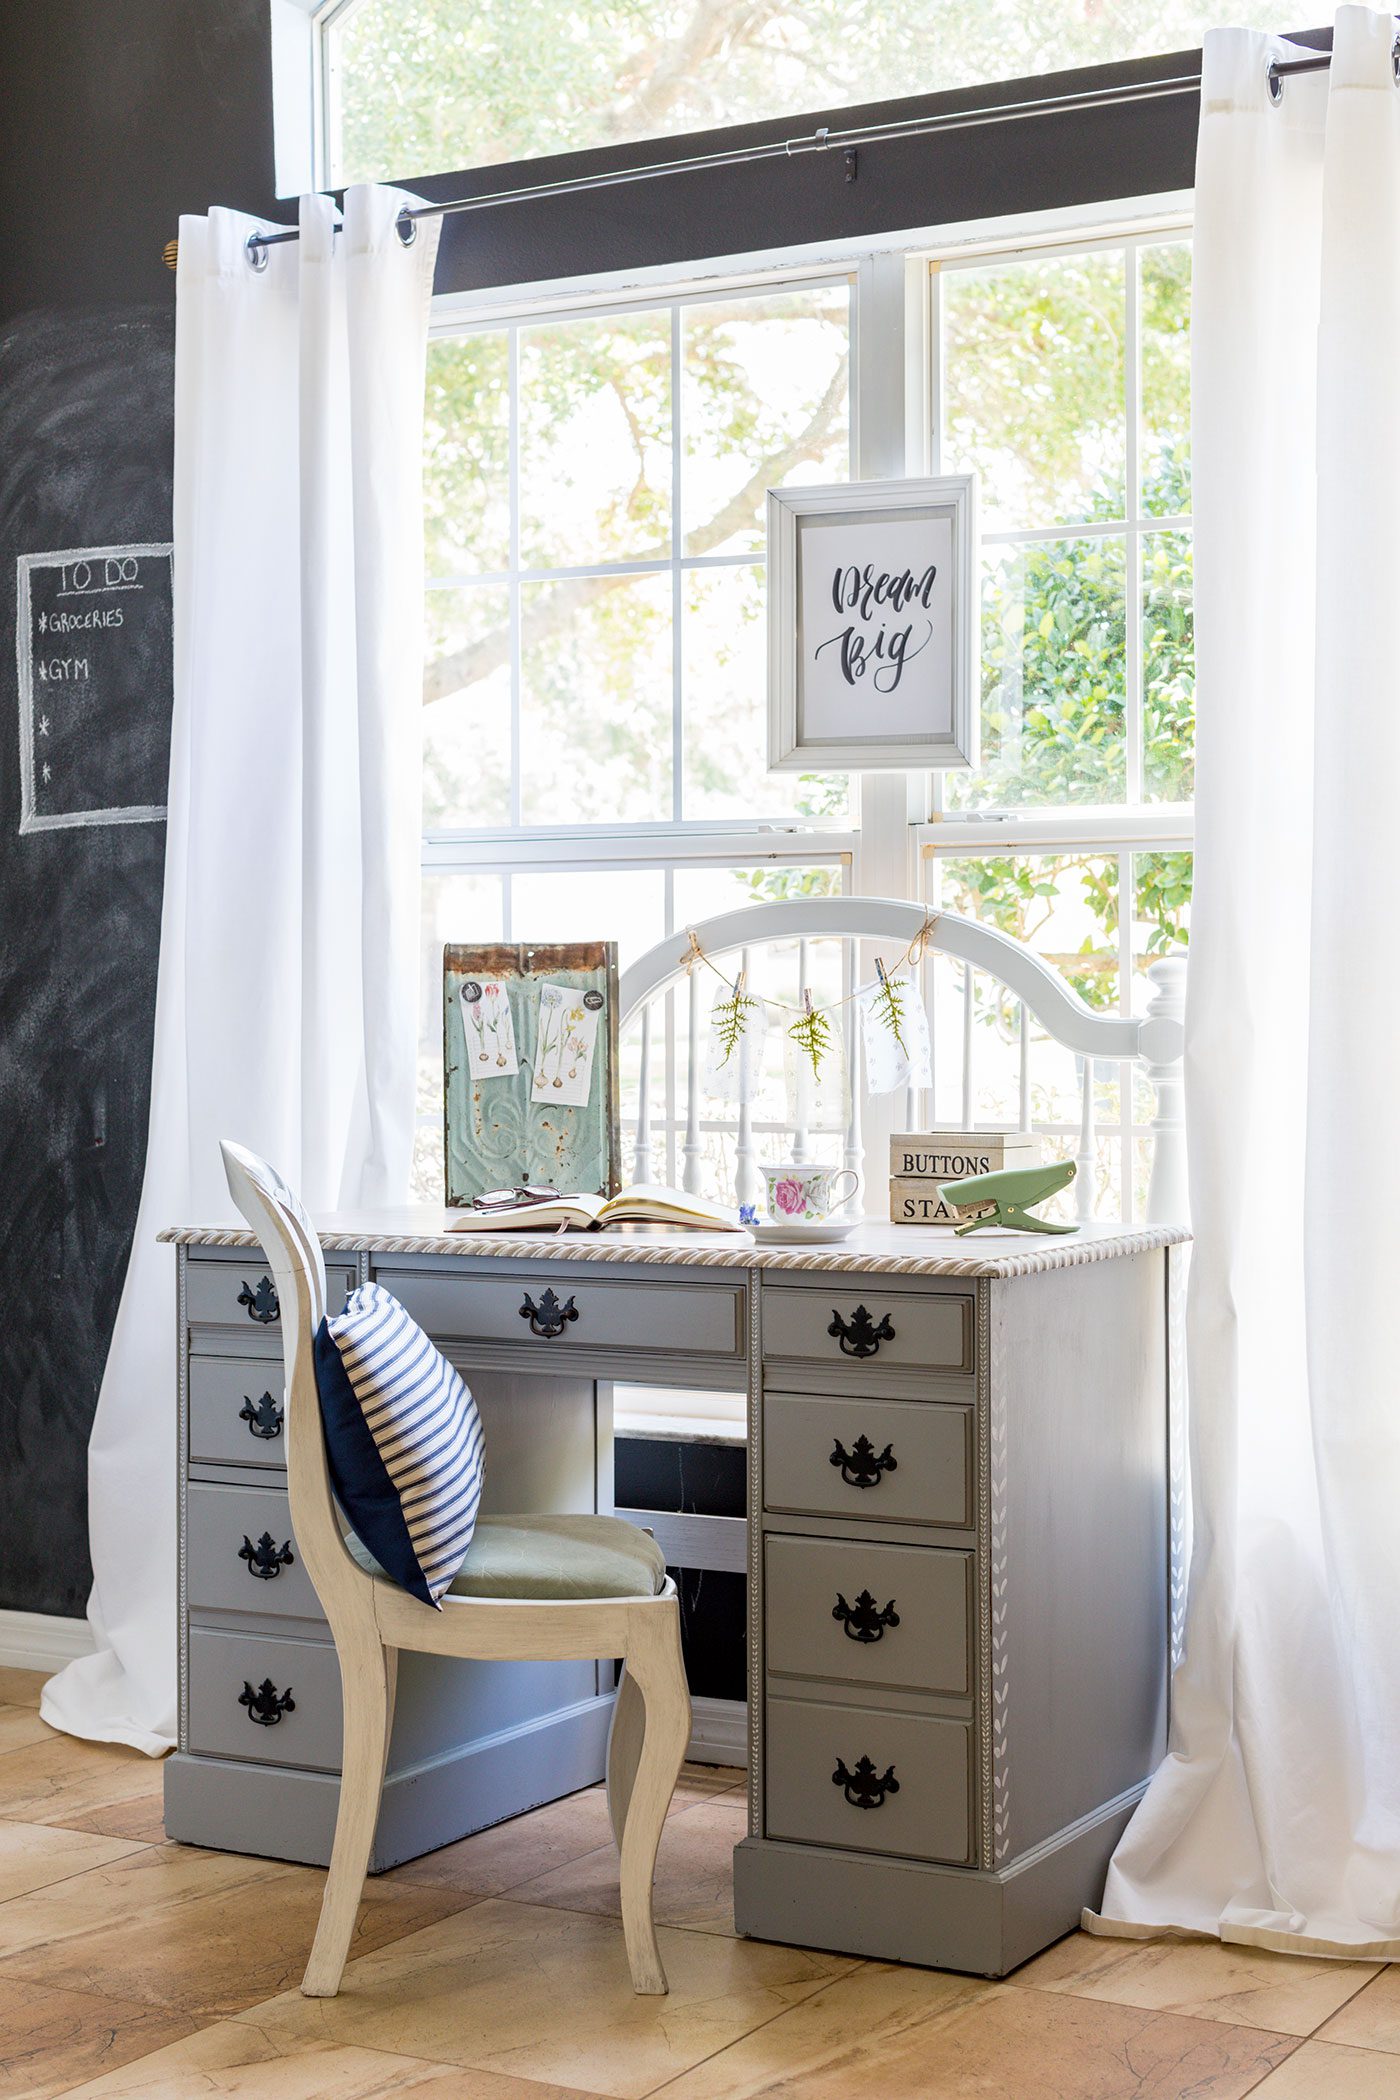 Desk area with botanical prints and blackboard wall, a space to make a remodel budget